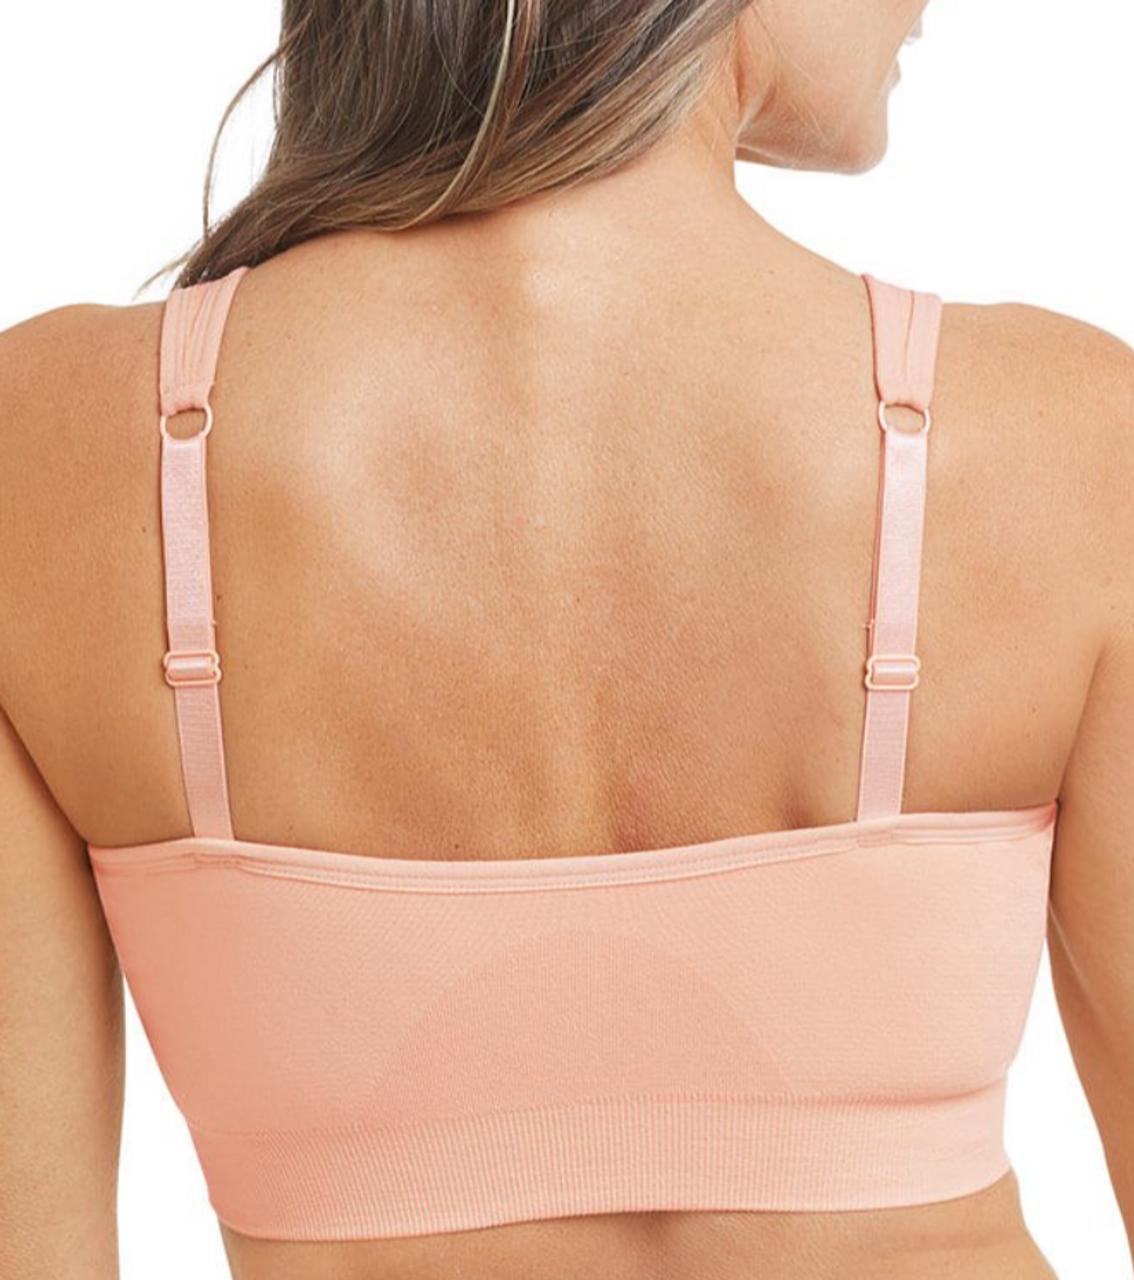 Ruiboury Prosthetic Breast Bra Two-in-one Post-mastectomy